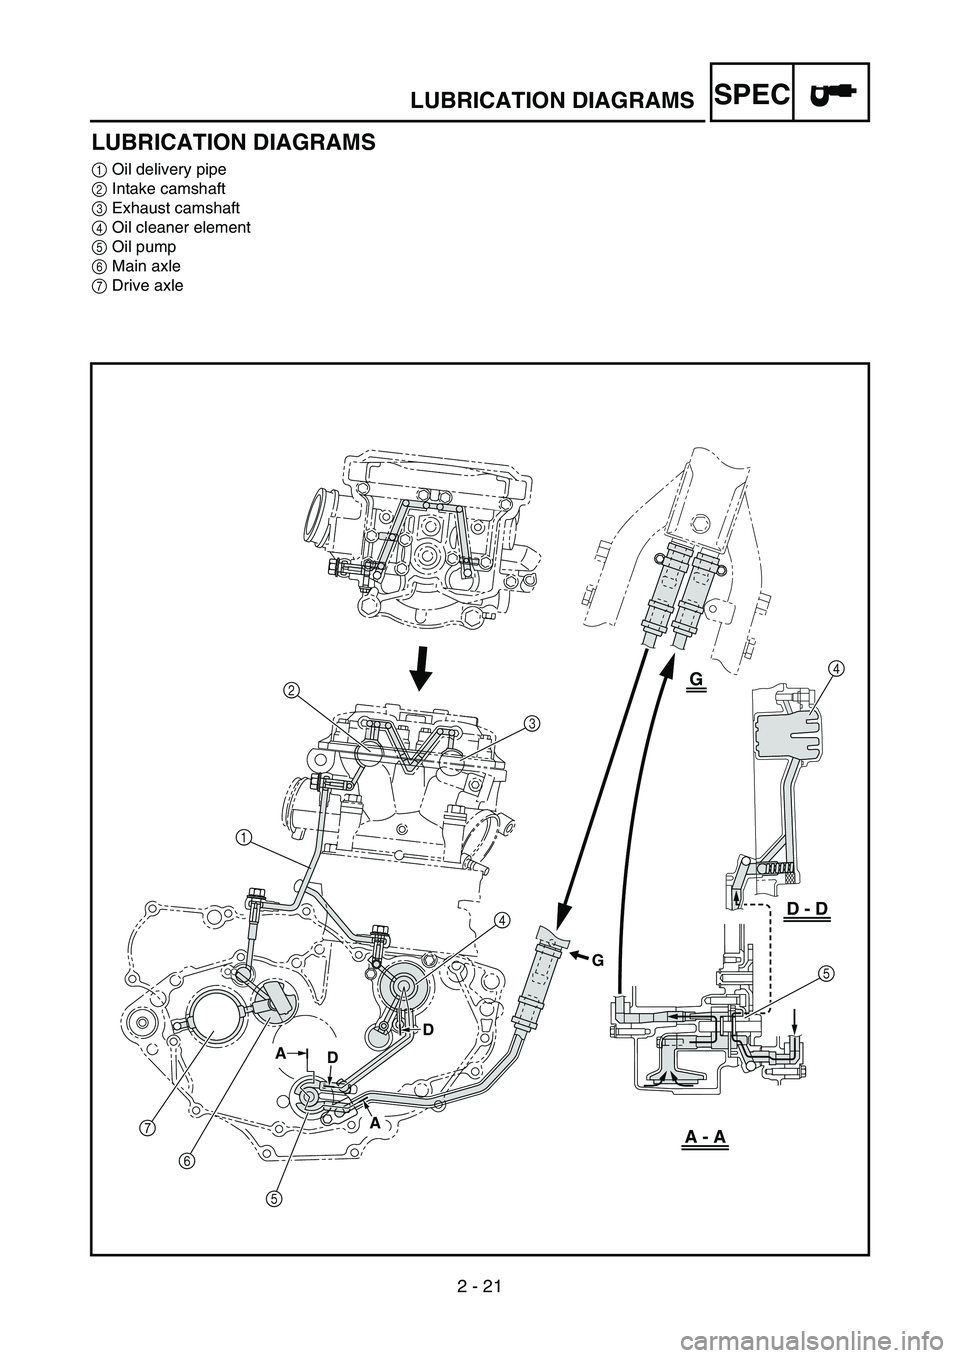 YAMAHA WR 450F 2006  Betriebsanleitungen (in German) 2 - 21
SPECLUBRICATION DIAGRAMS
LUBRICATION DIAGRAMS
1Oil delivery pipe
2Intake camshaft
3Exhaust camshaft
4Oil cleaner element
5Oil pump
6Main axle
7Drive axle
7
6
543 24
5
A - A
D - D
G
G
D
D A
A
1 